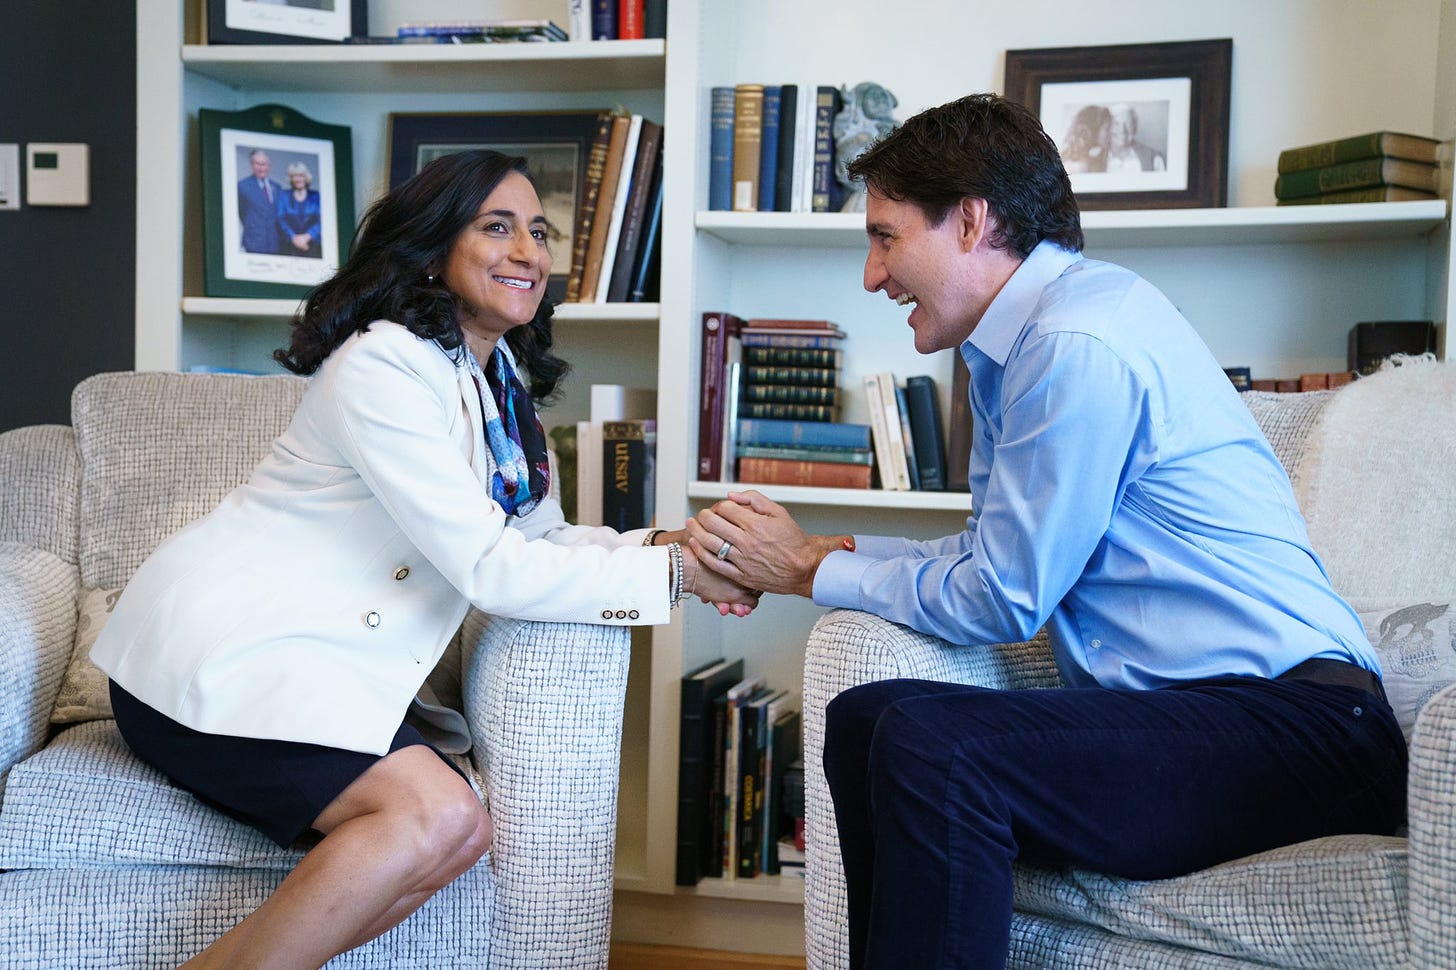 Minister Anand meets with Prime Minister Trudeau.